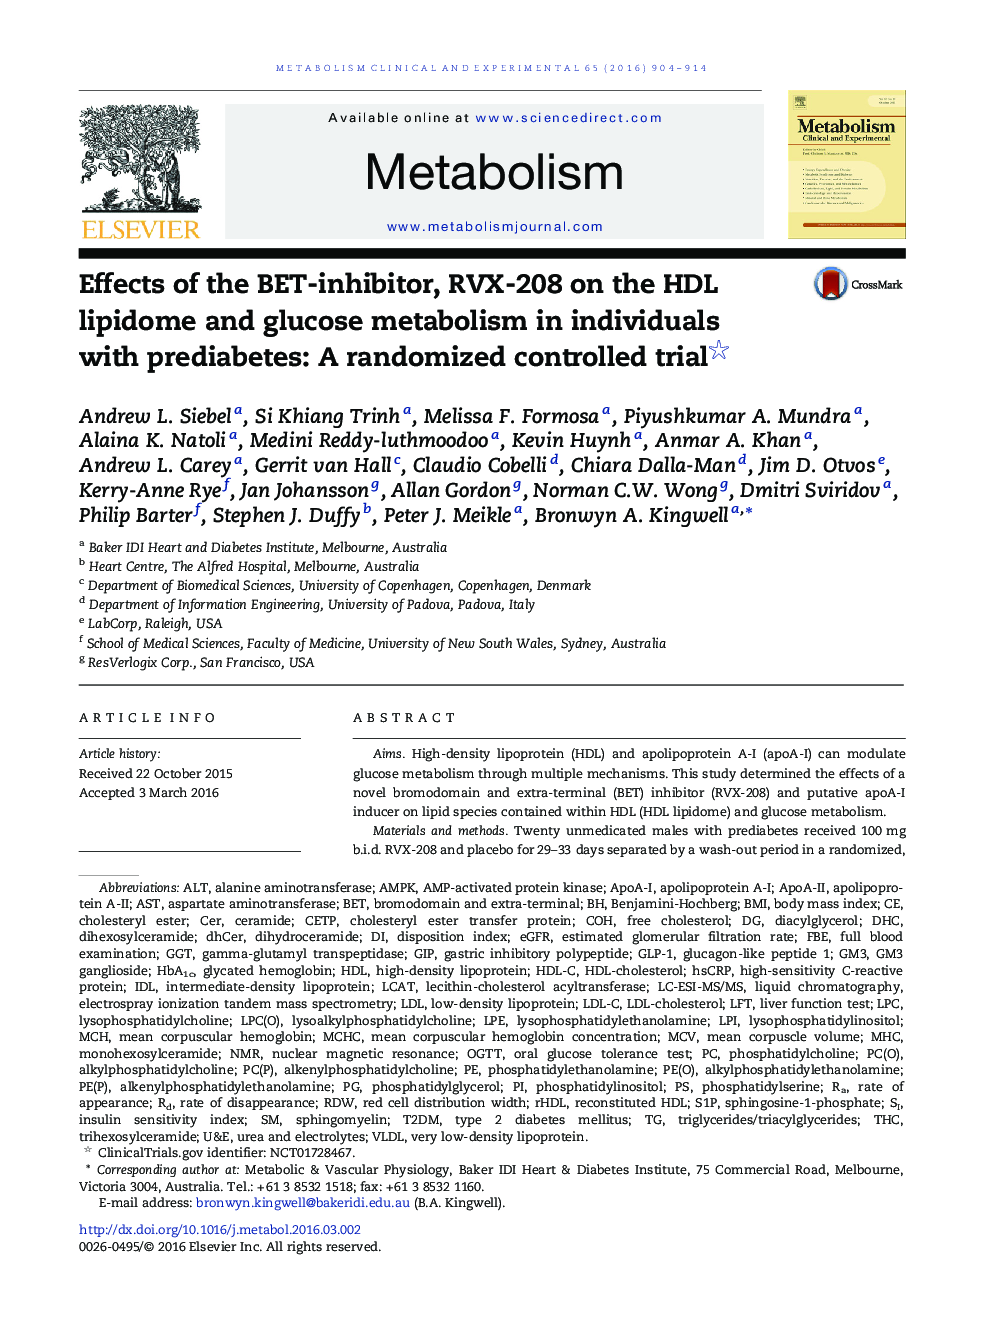 Effects of the BET-inhibitor, RVX-208 on the HDL lipidome and glucose metabolism in individuals with prediabetes: A randomized controlled trial